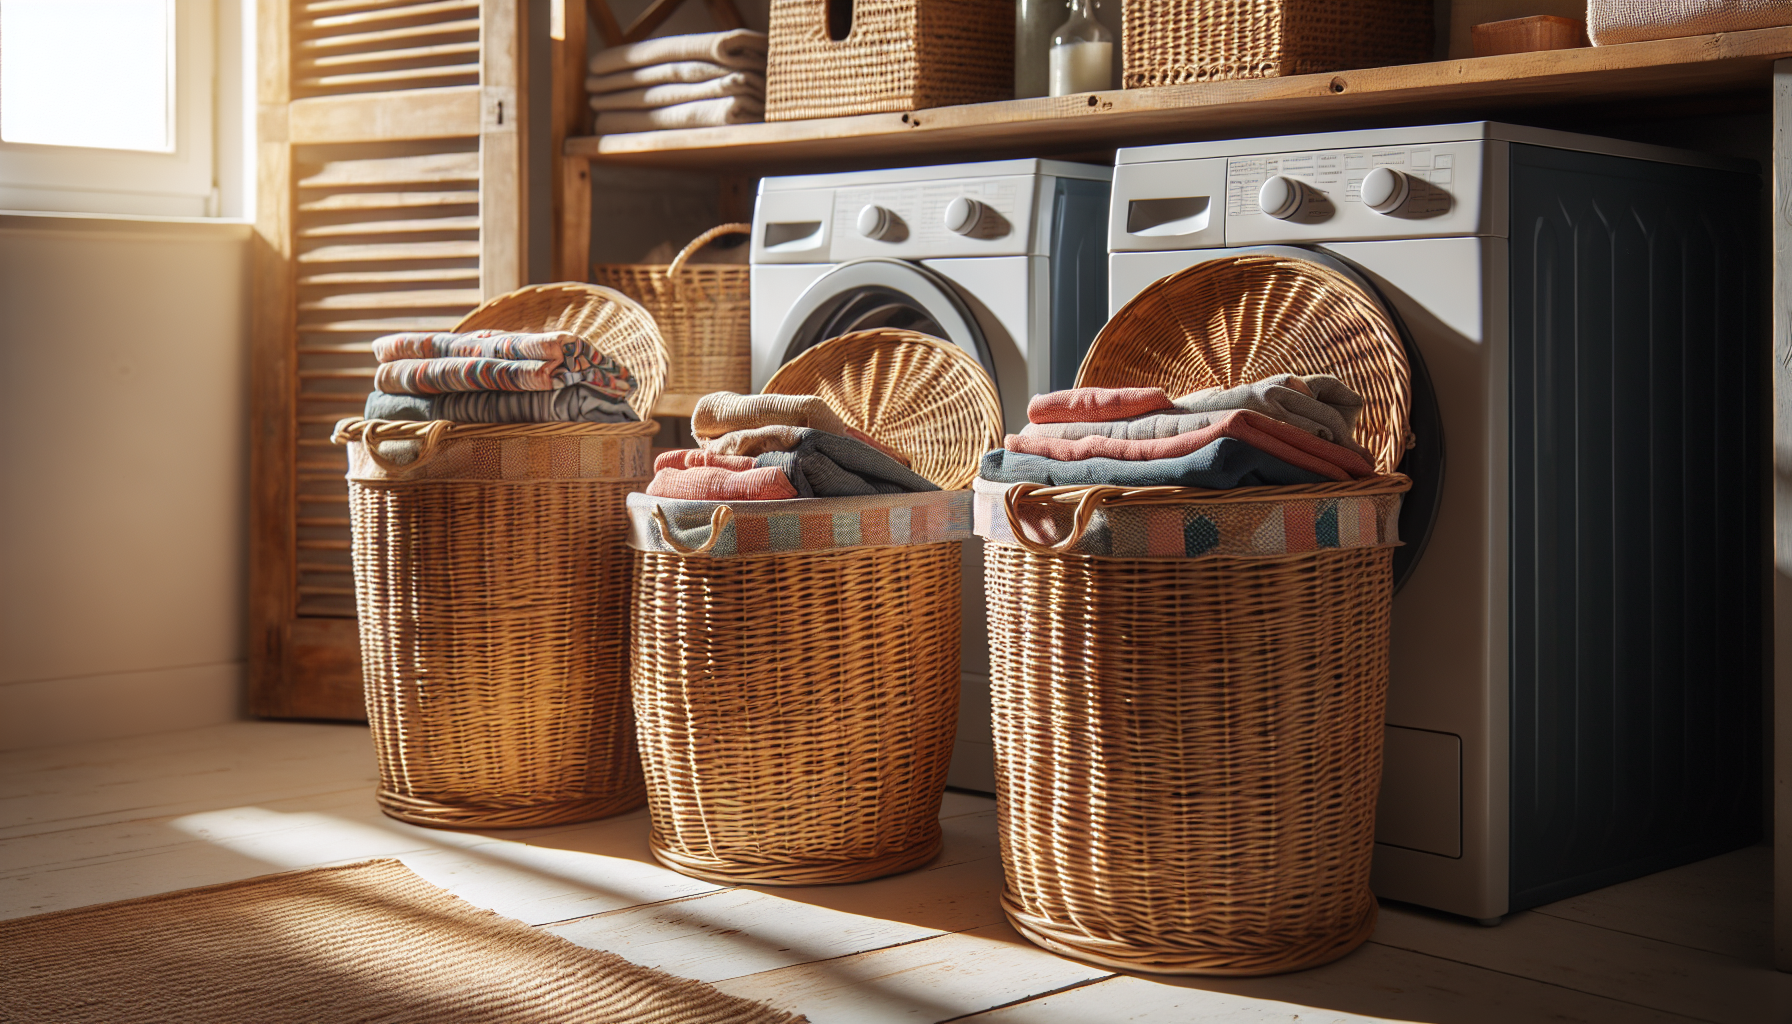 Laundry Baskets with Lids for Privacy